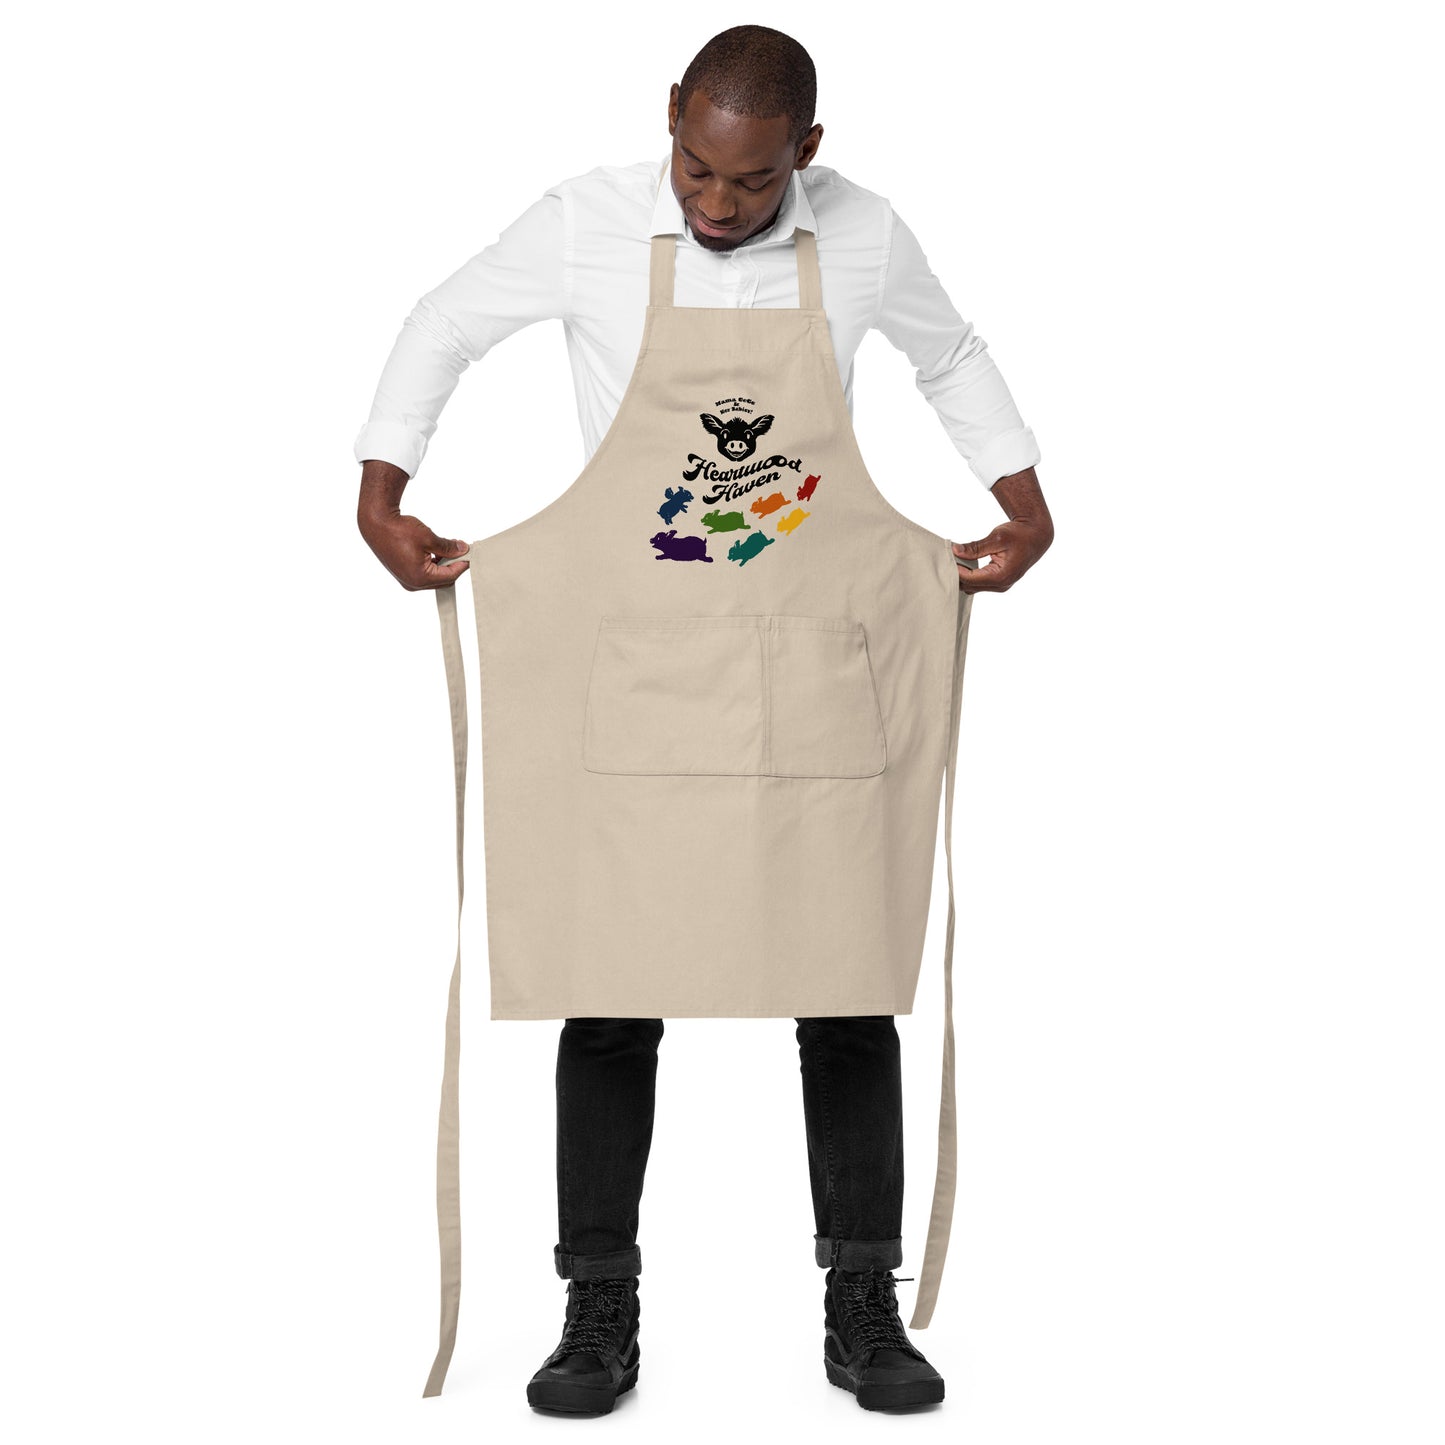 HEARTWOOD HAVEN - Mama CeCe & Her Babies - Organic cotton apron